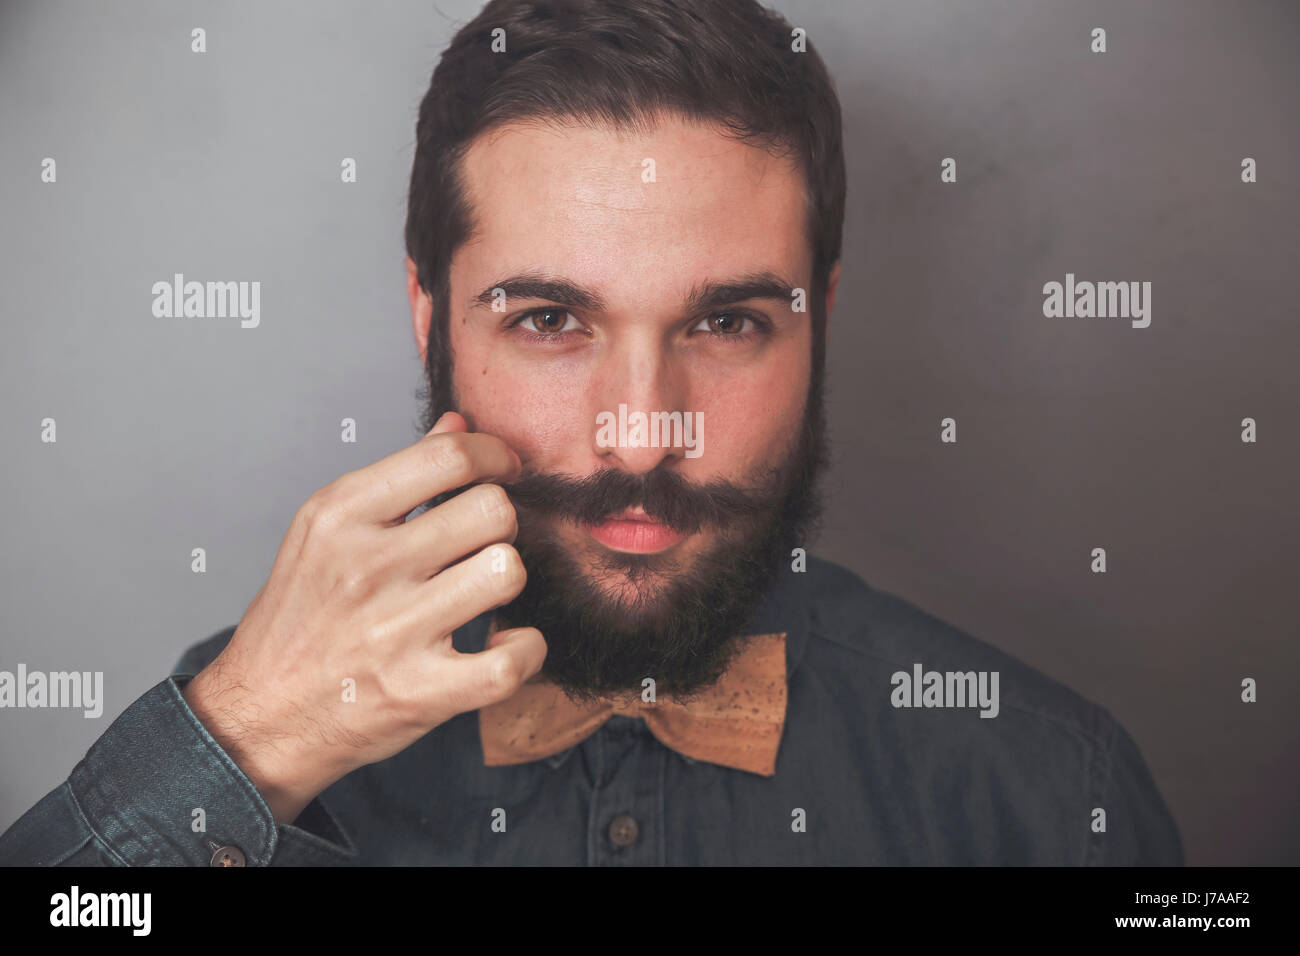 Bearded man adjusting his moustache, wearing denim shirt and cork bow tie Stock Photo